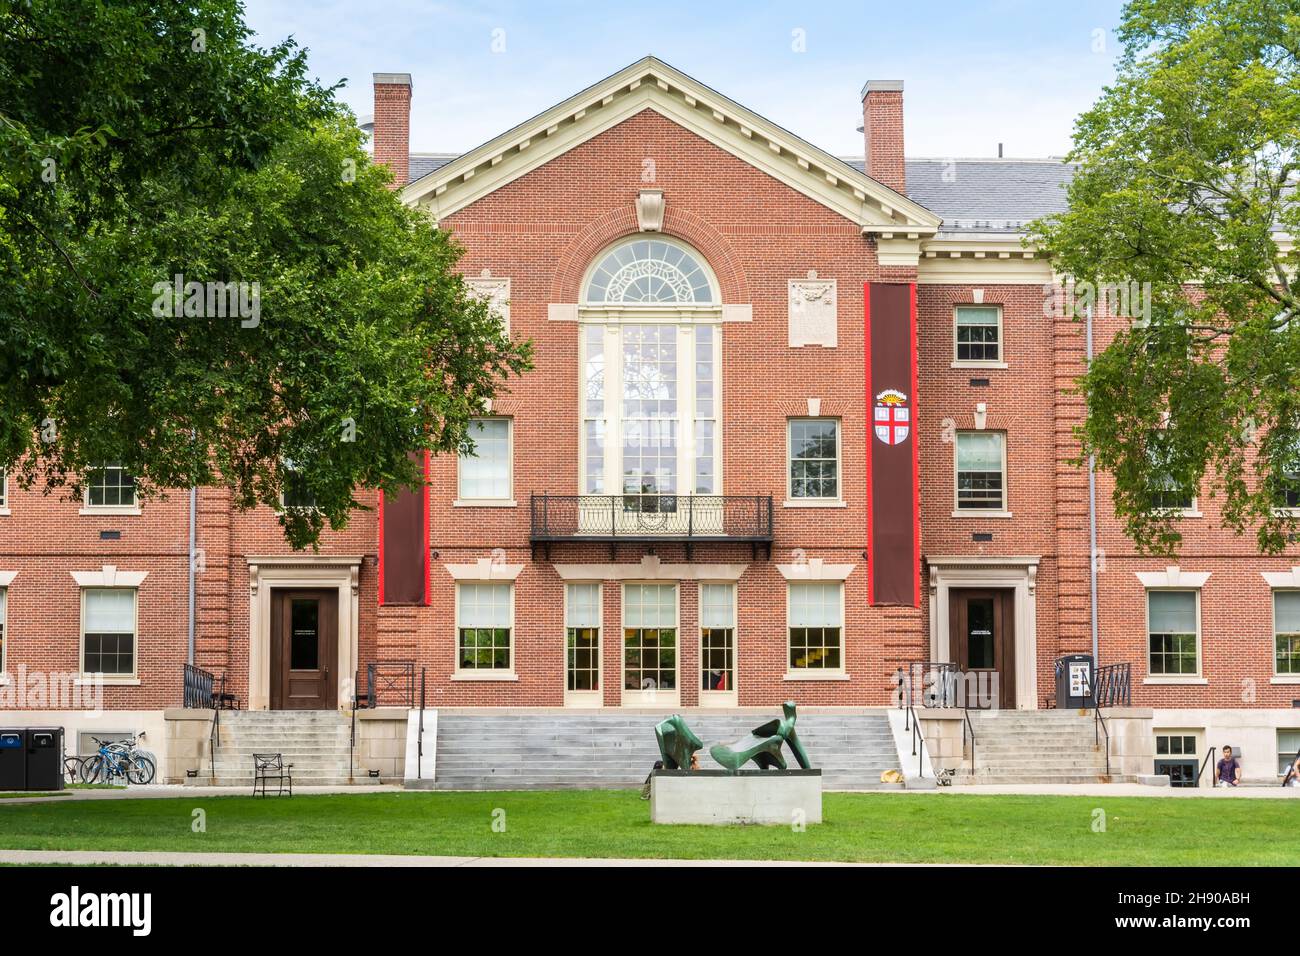 Providence, Rhode Island, United States of America – September 5, 2016. The Faunce House of the Brown University in Providence, RI. Faunce House was d Stock Photo